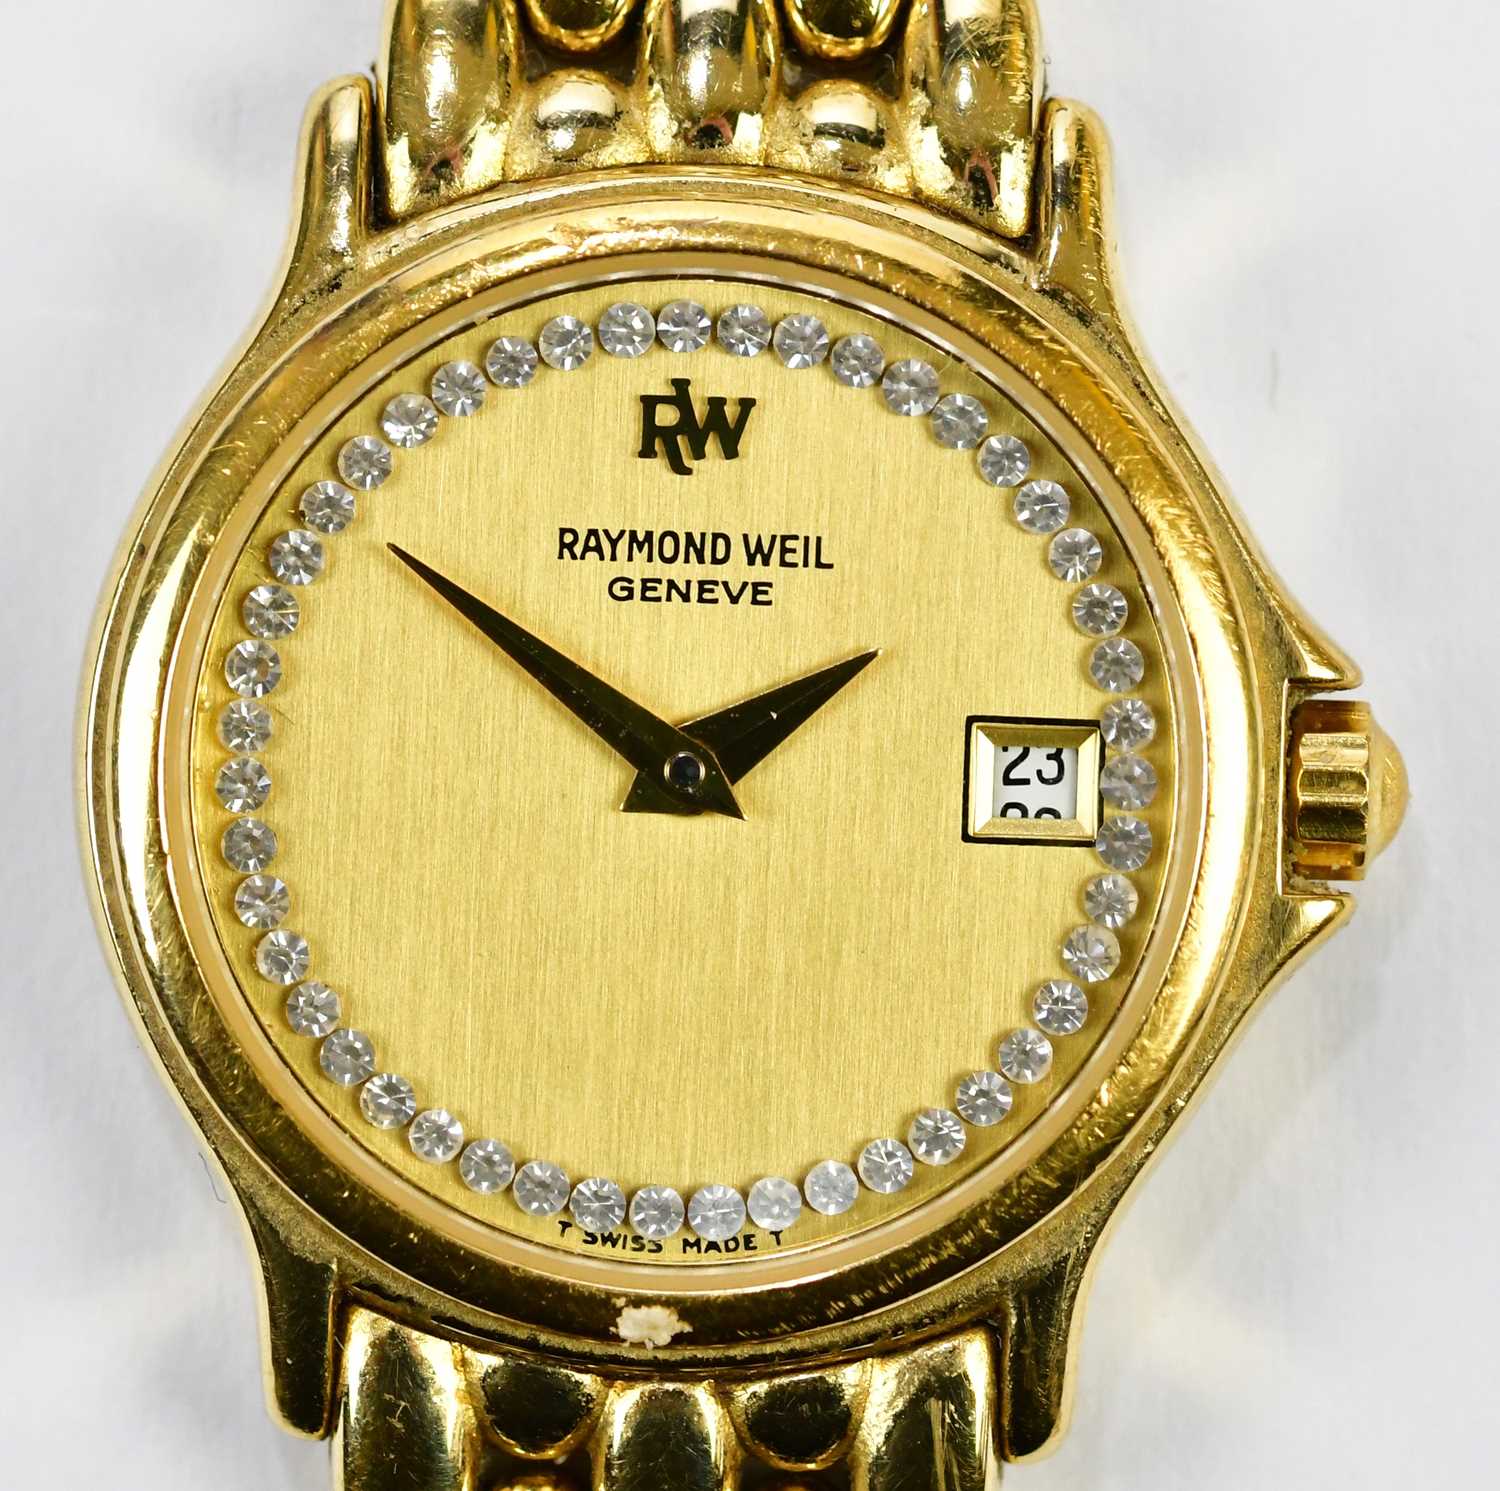 RAYMOND WEIL; a lady's gold plated wristwatch with circular dial set with date aperture with both